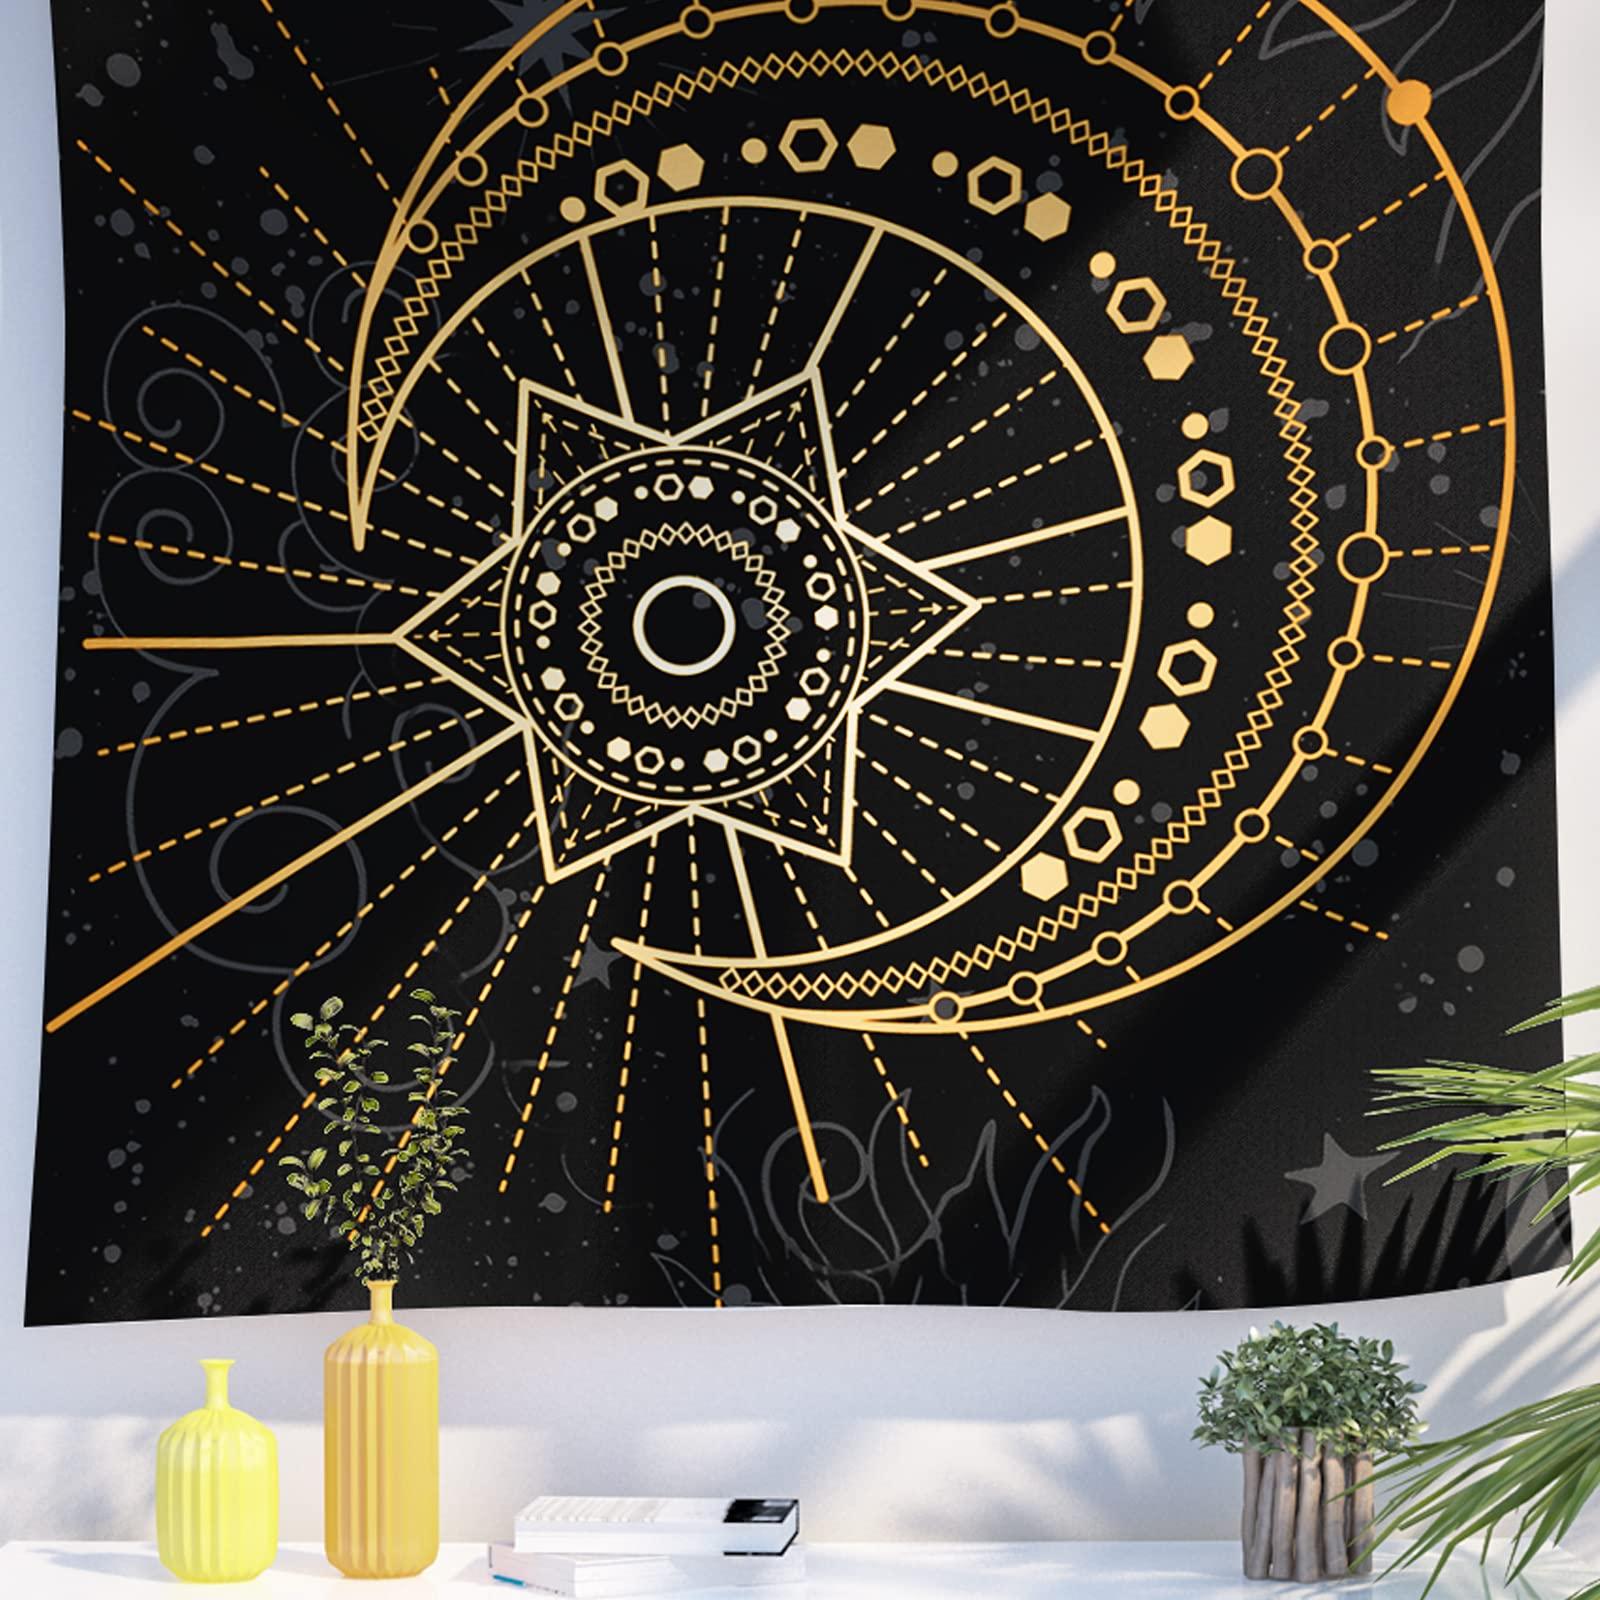 Berkin Arts Decor Tapestry for Wall Hanging Premium Polyester Fabric Backdrop Art Nouveau Ornate Galactic Gold 59.1 x 78.7 Inch